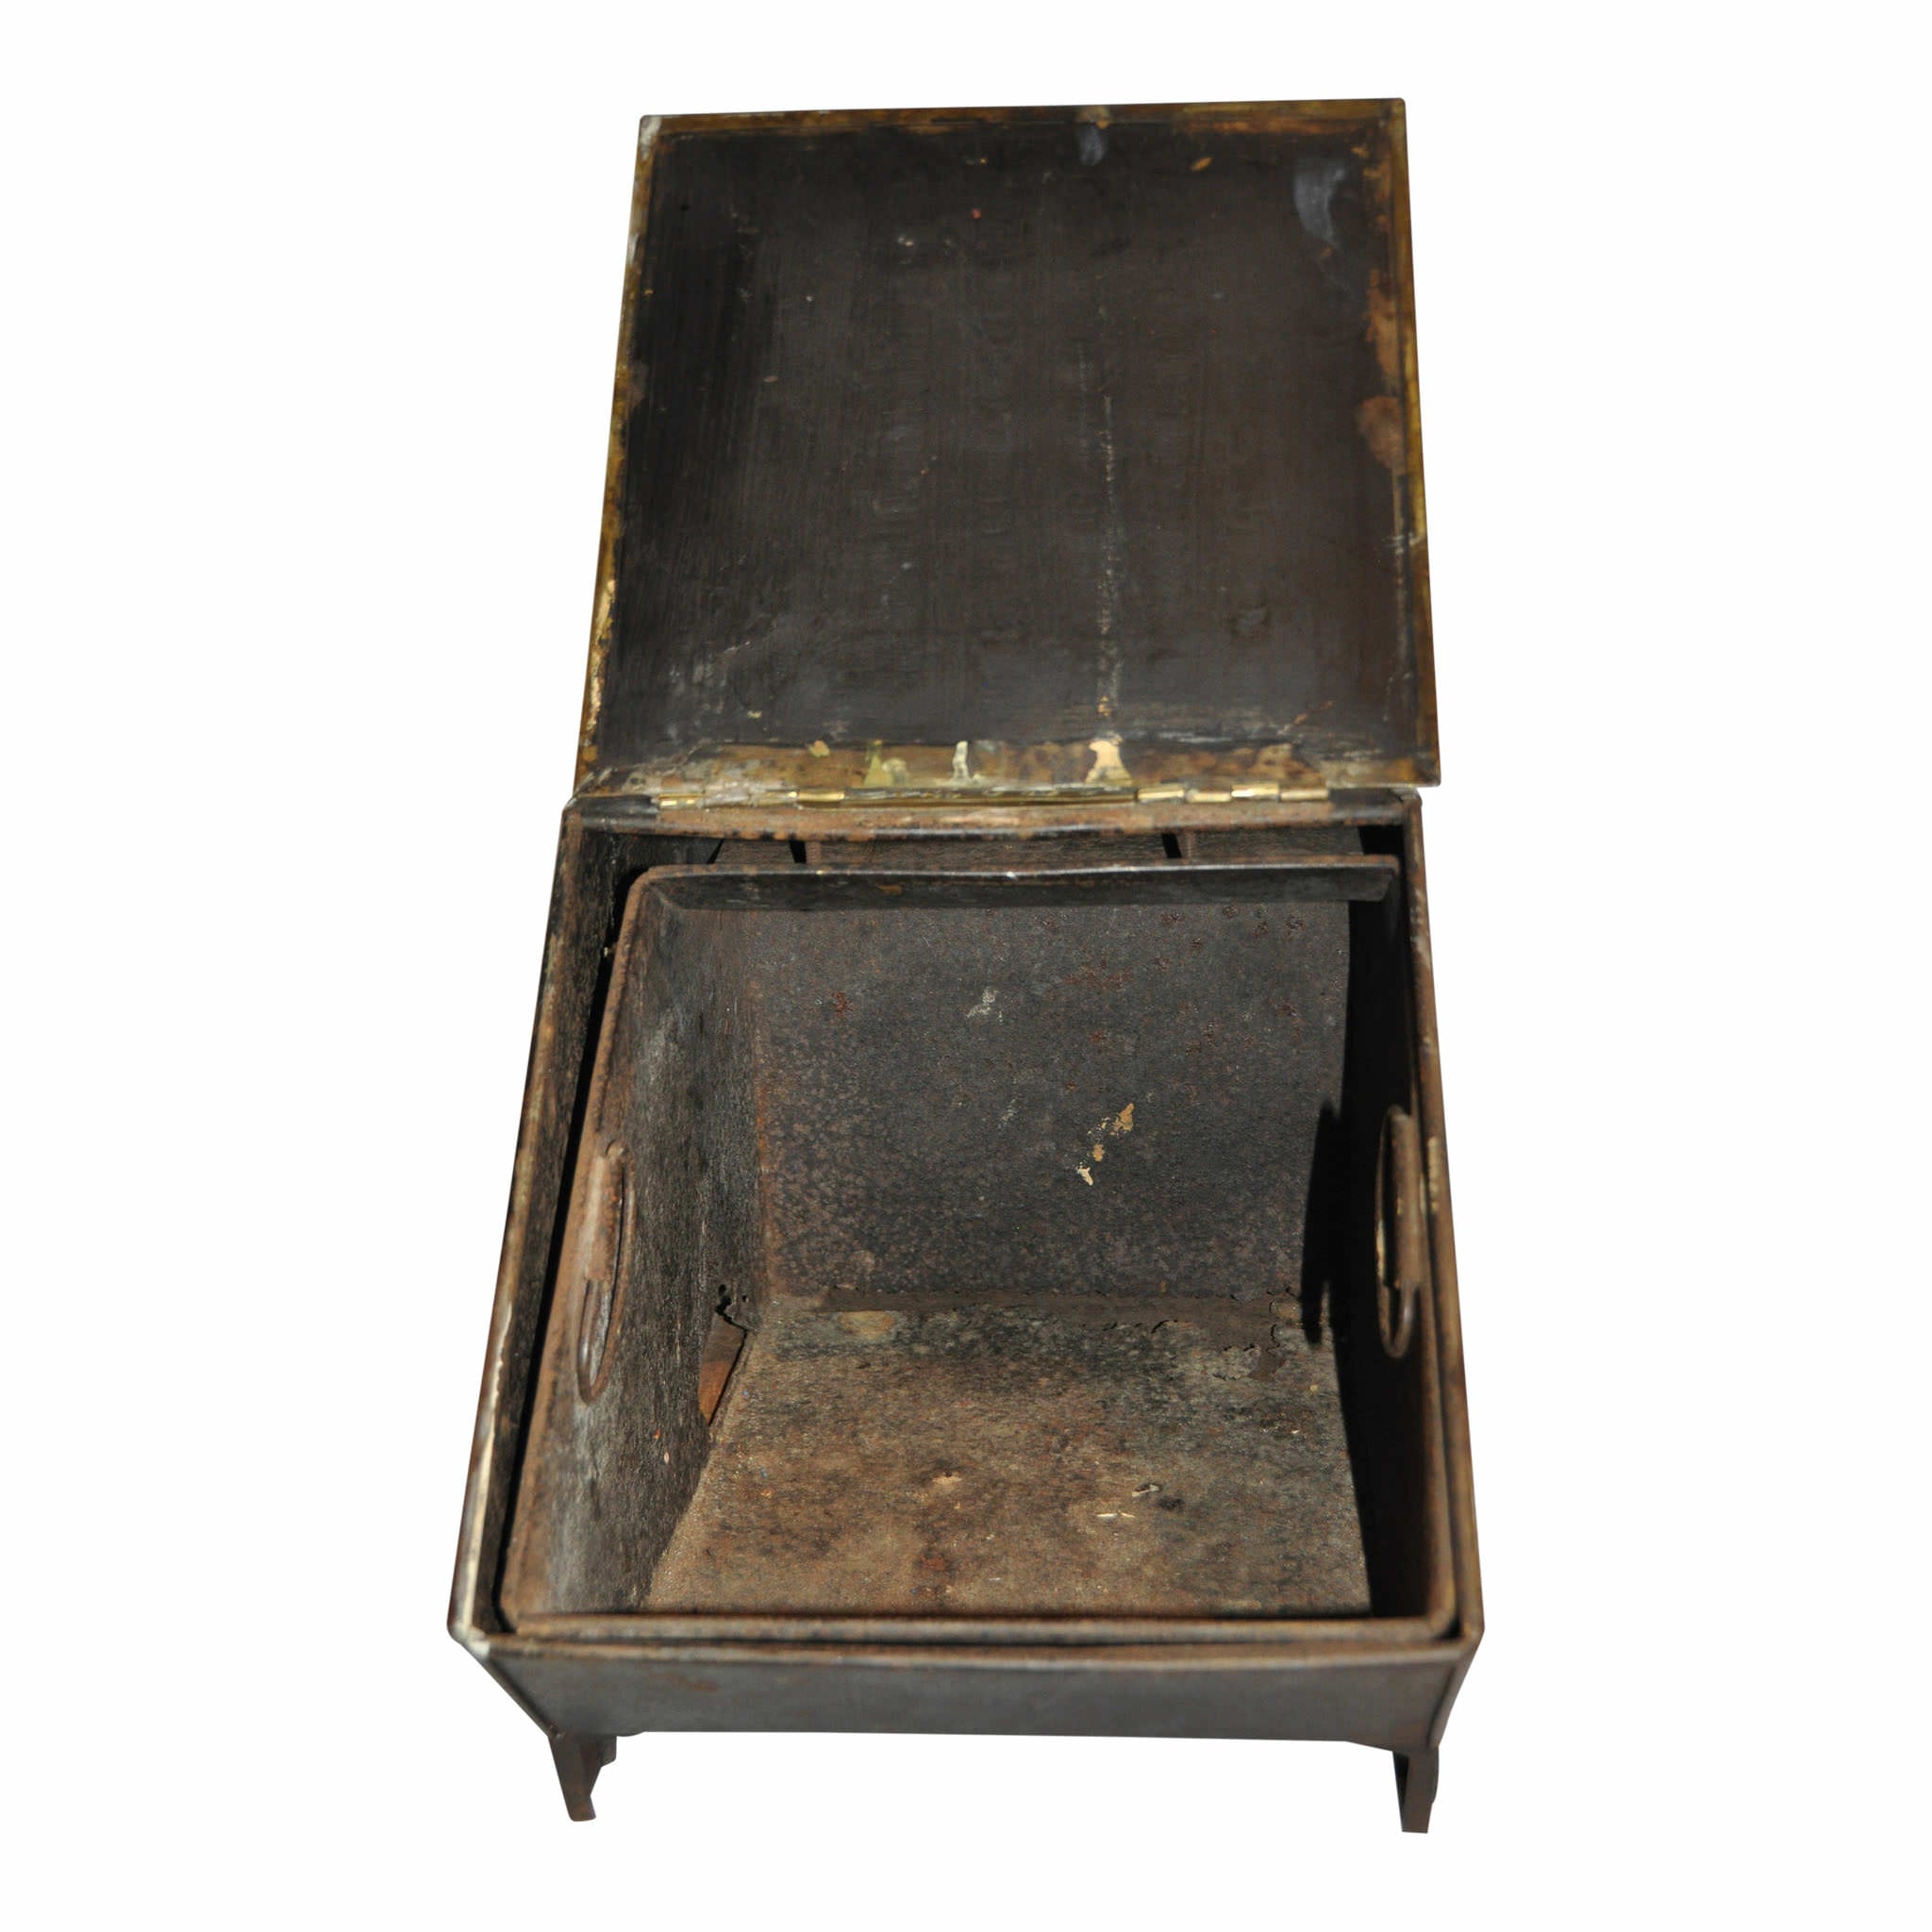 Brass and Metal Coal Scuttle Bin with Scoop